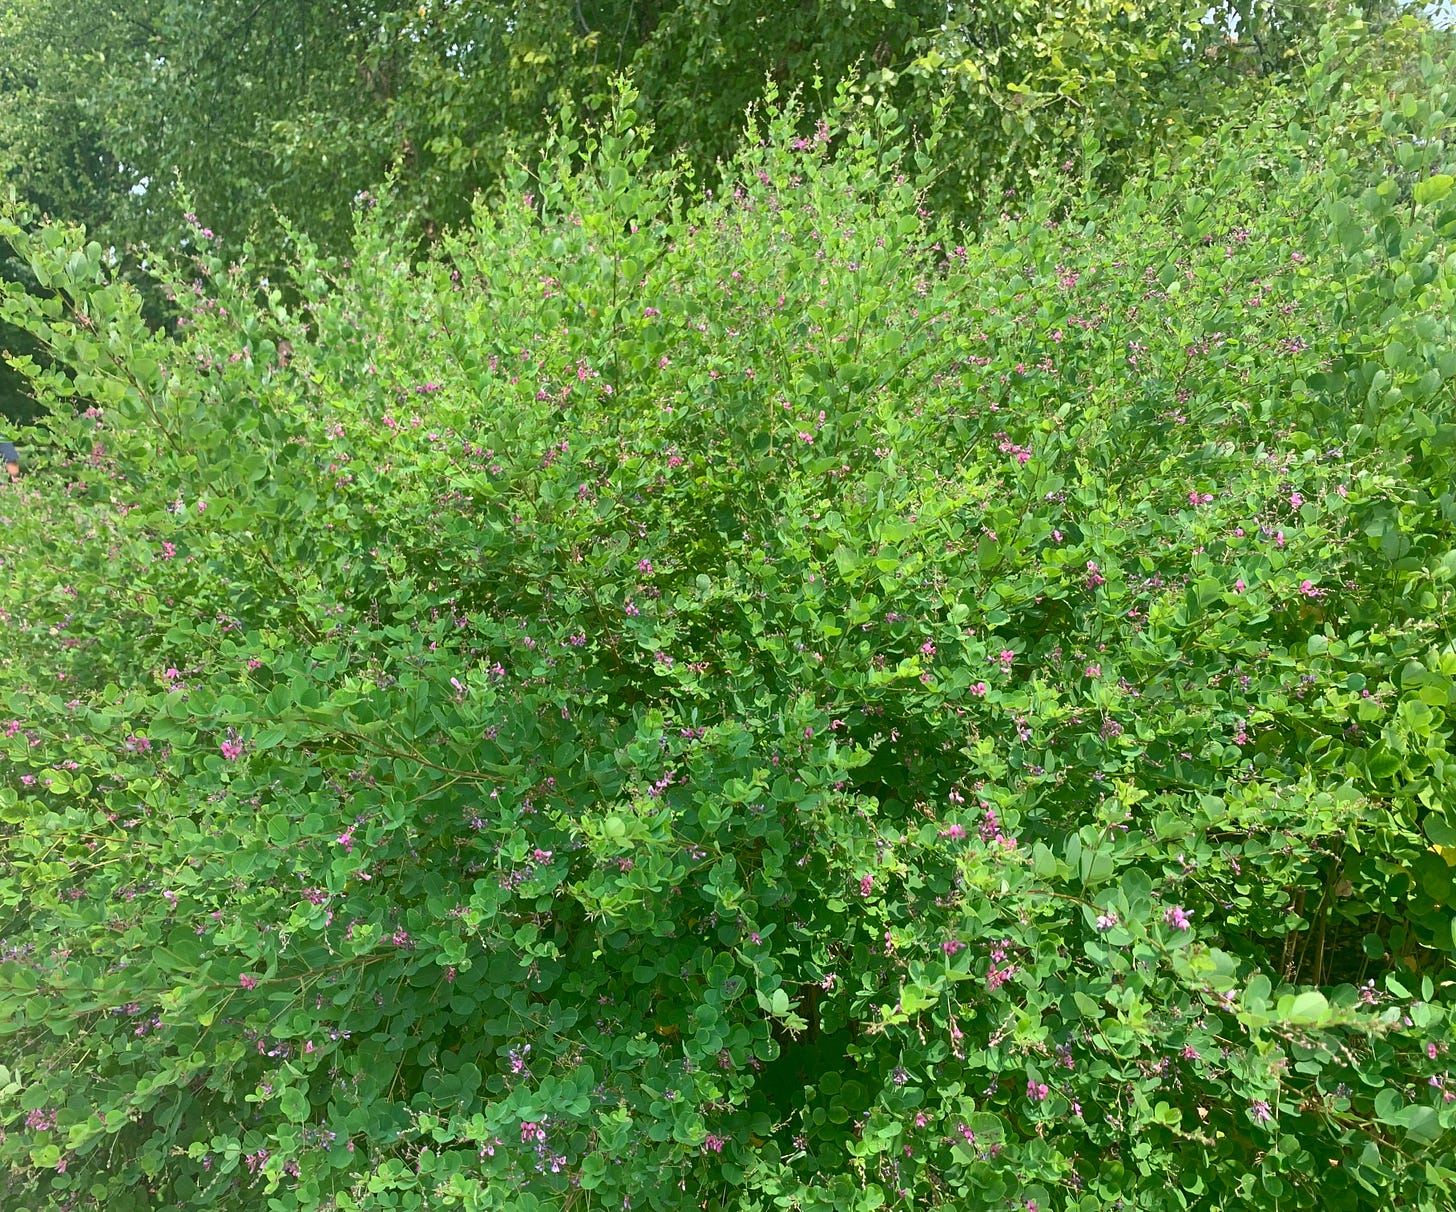 Large shrub with small pink flowers on the ends of branches